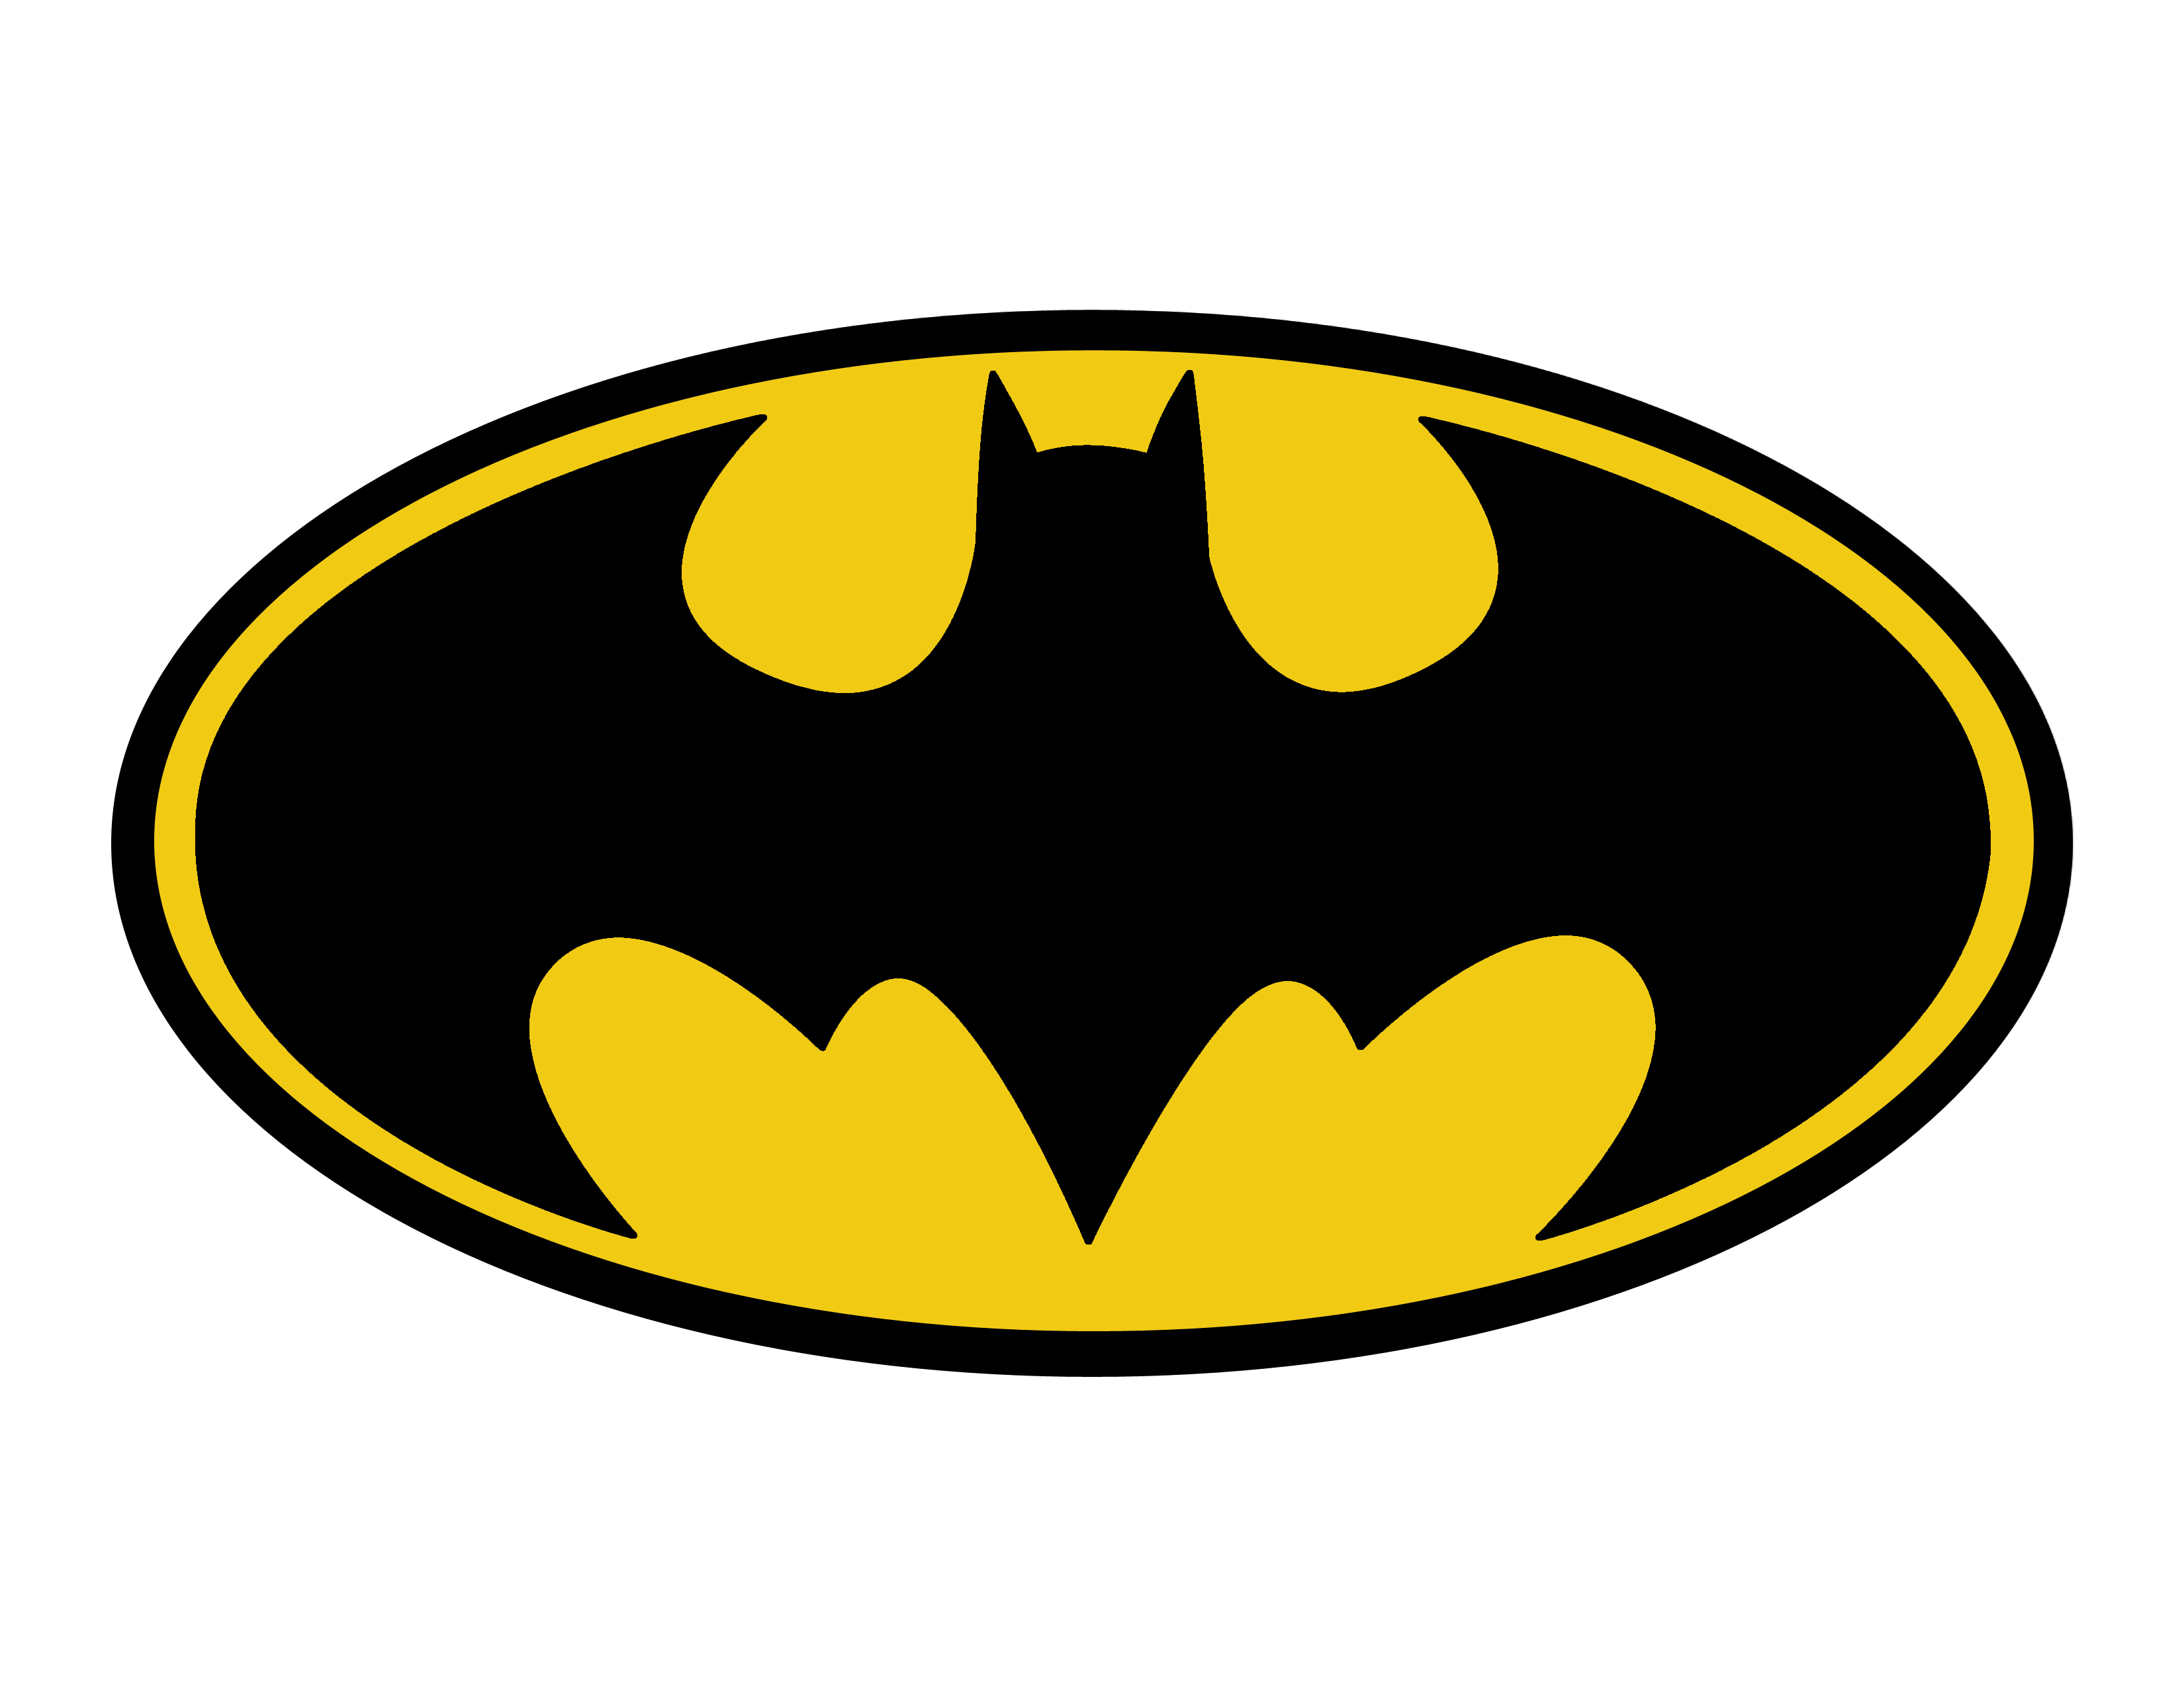 20 Batman Logo Vector Png Free Cliparts That You Can Download To You